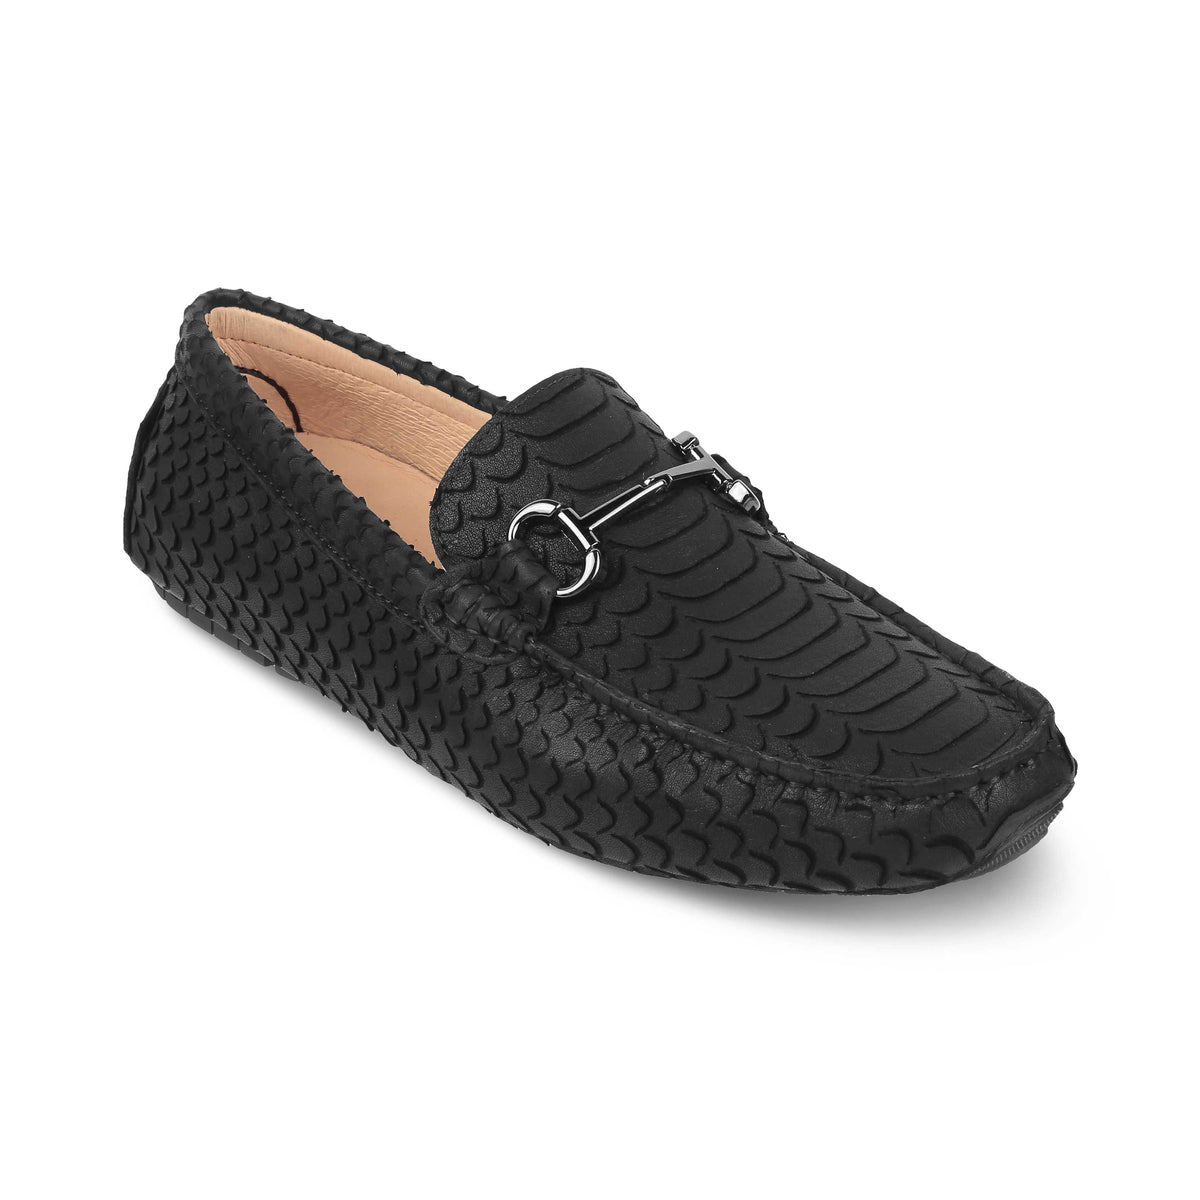 Tresmode Sofi Black Men's Leather Driving Loafers - Tresmode